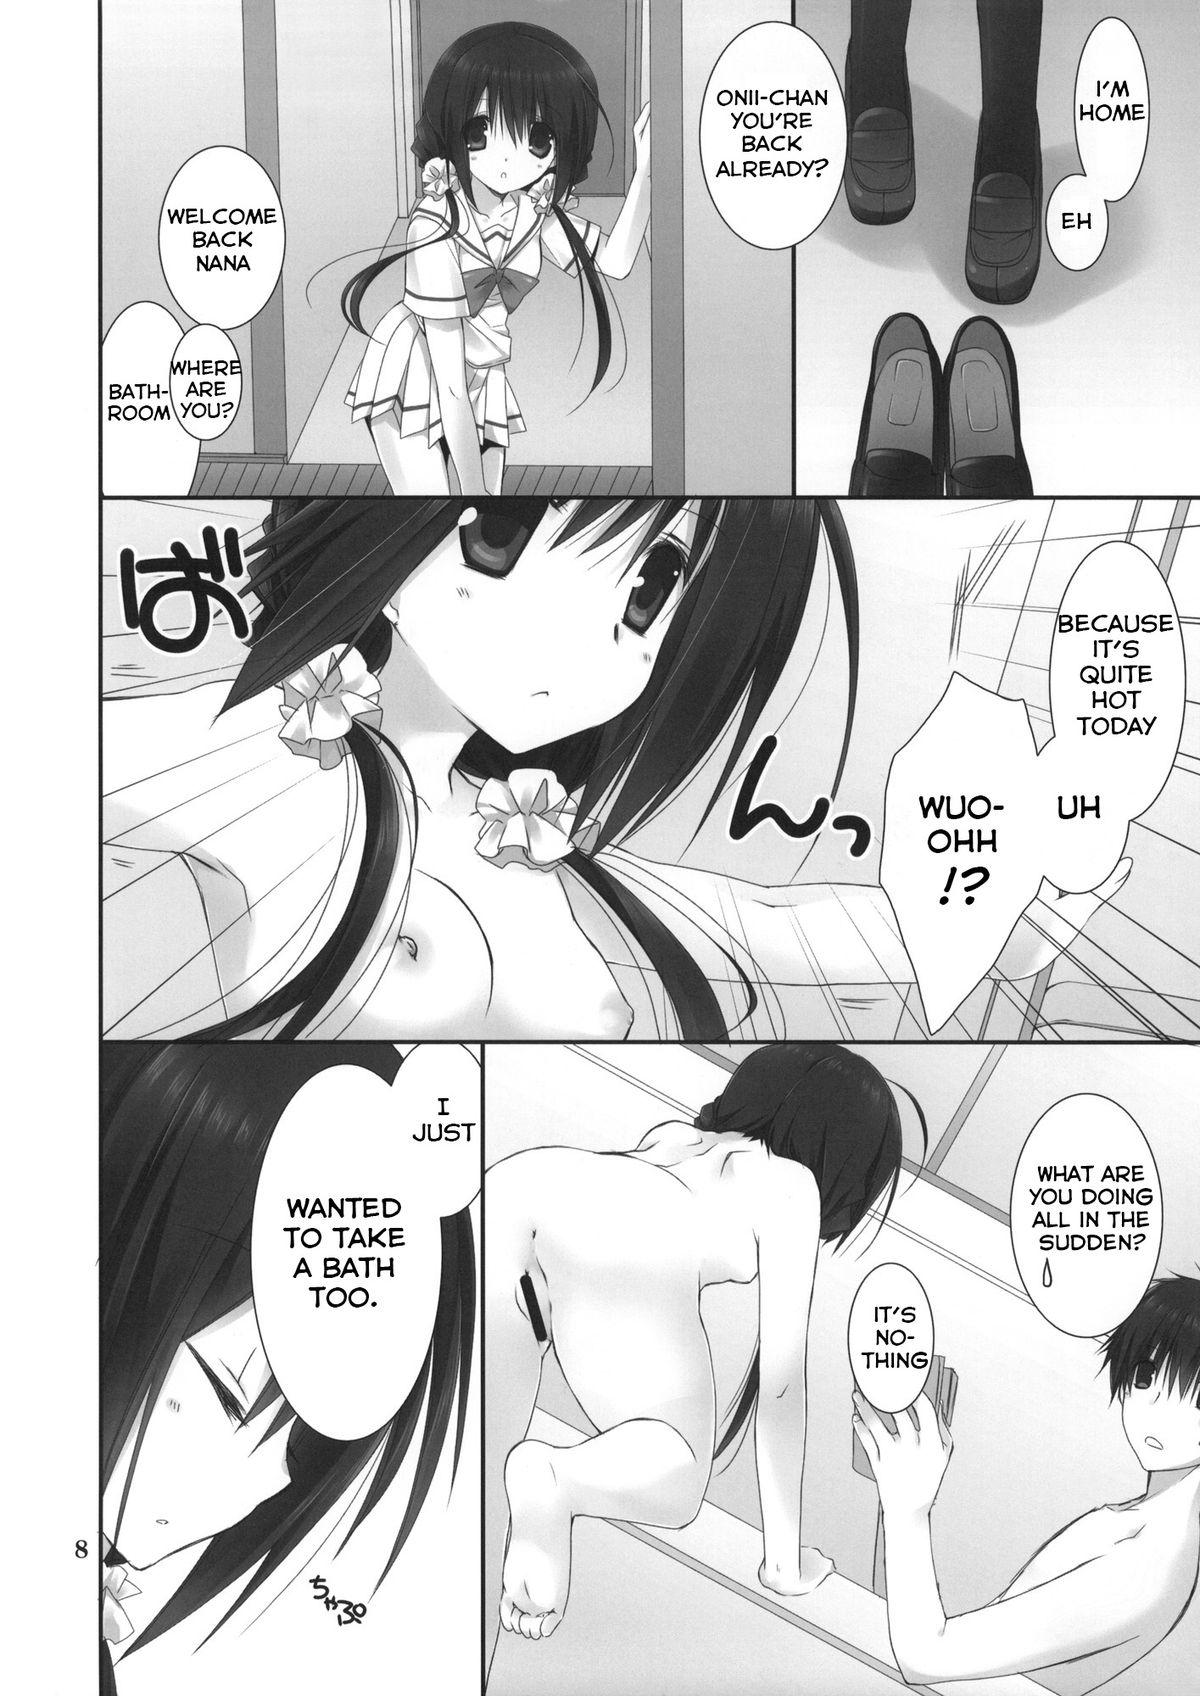 Brunettes Imouto no Otetsudai 4 | Little Sister Helper 4 Furry - Page 7